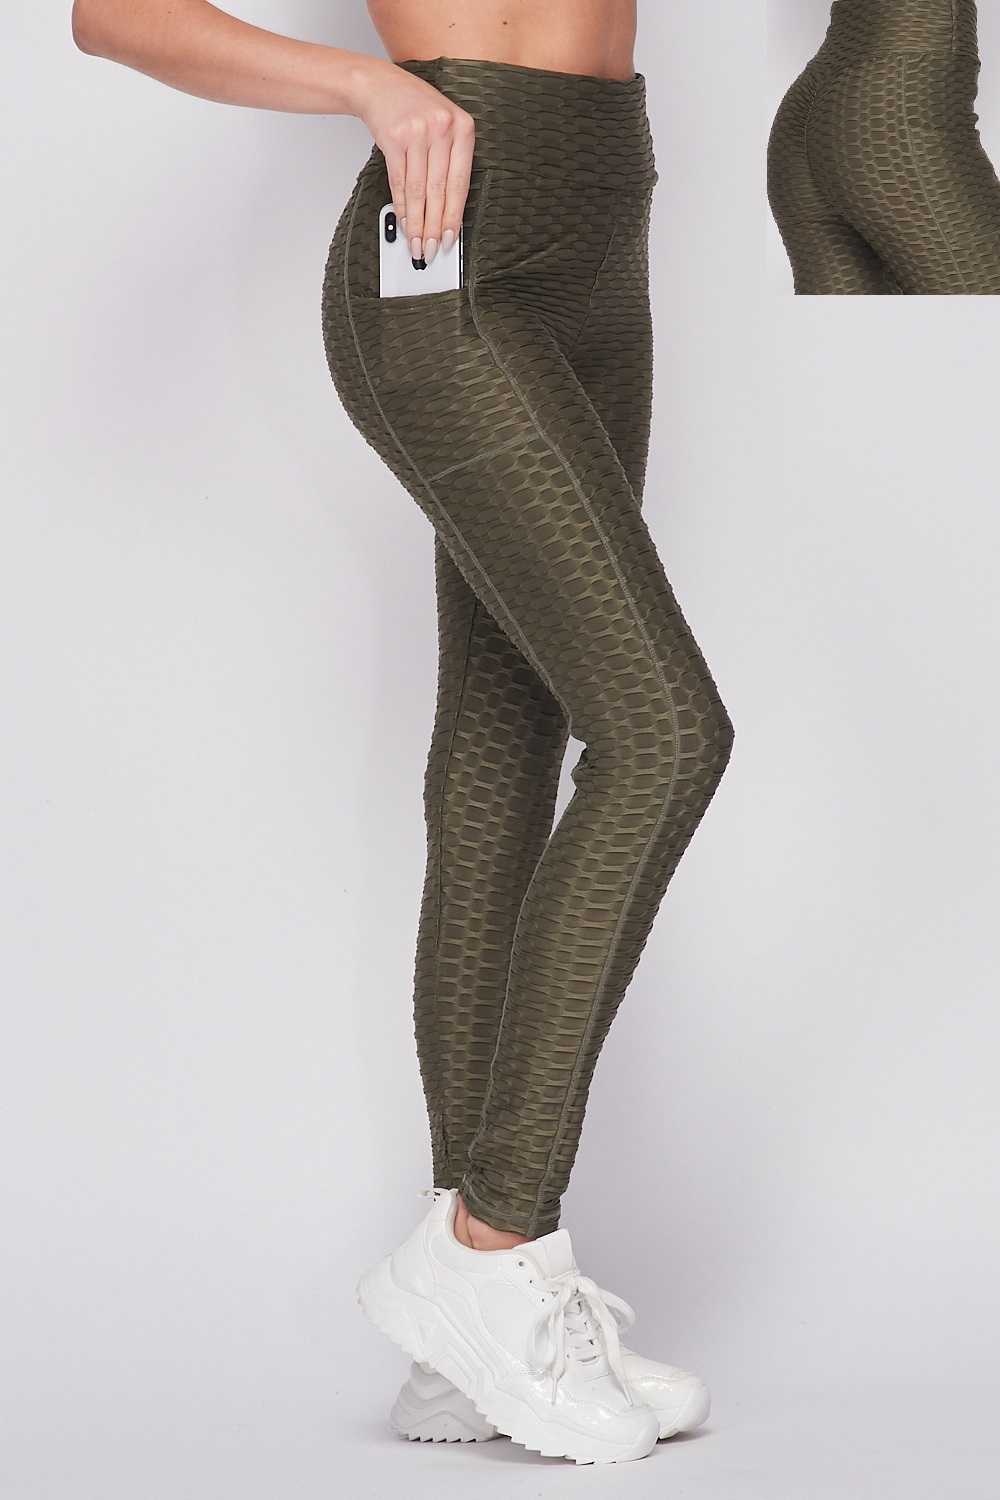 Just Leggings For Women  International Society of Precision Agriculture